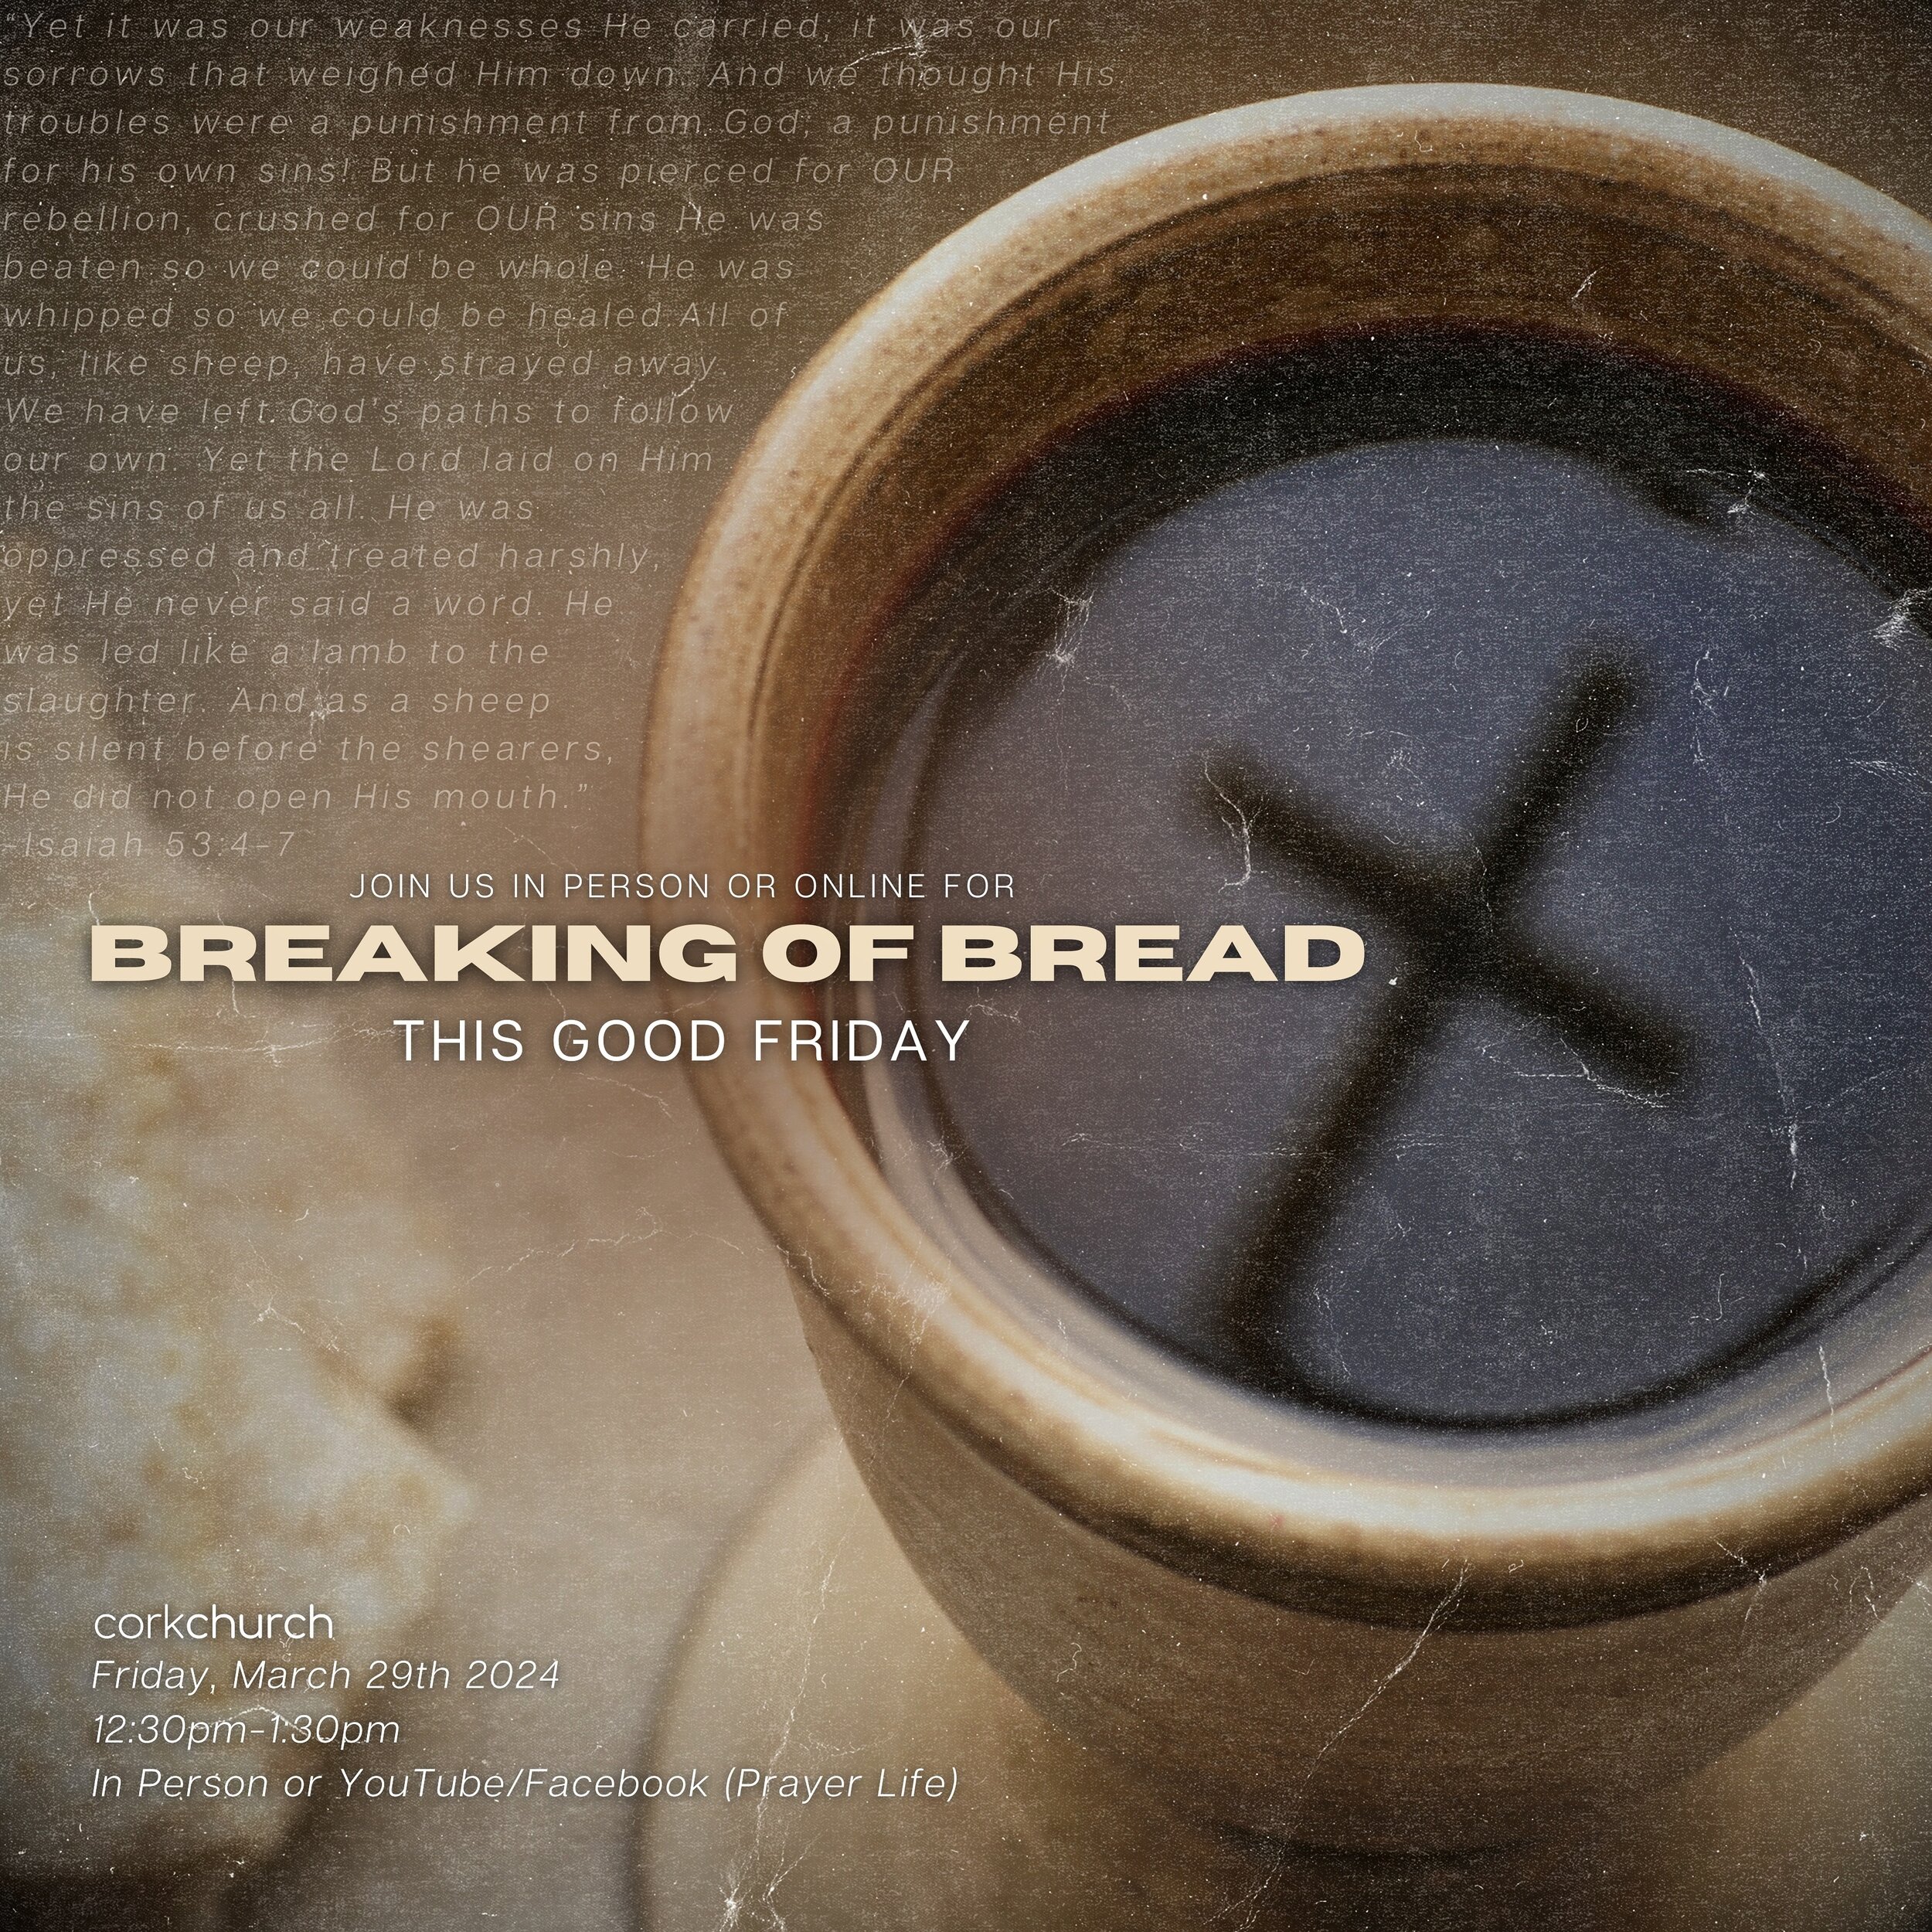 Join us tomorrow, March 29th, in person or online (YouTube/Facebook - Prayer Life) for Breaking Of Bread &amp; prayer this Good Friday! Starting at 12:30pm. Let&rsquo;s take this time to reflect on what Christ has done for us this day.

&ldquo;Yet it